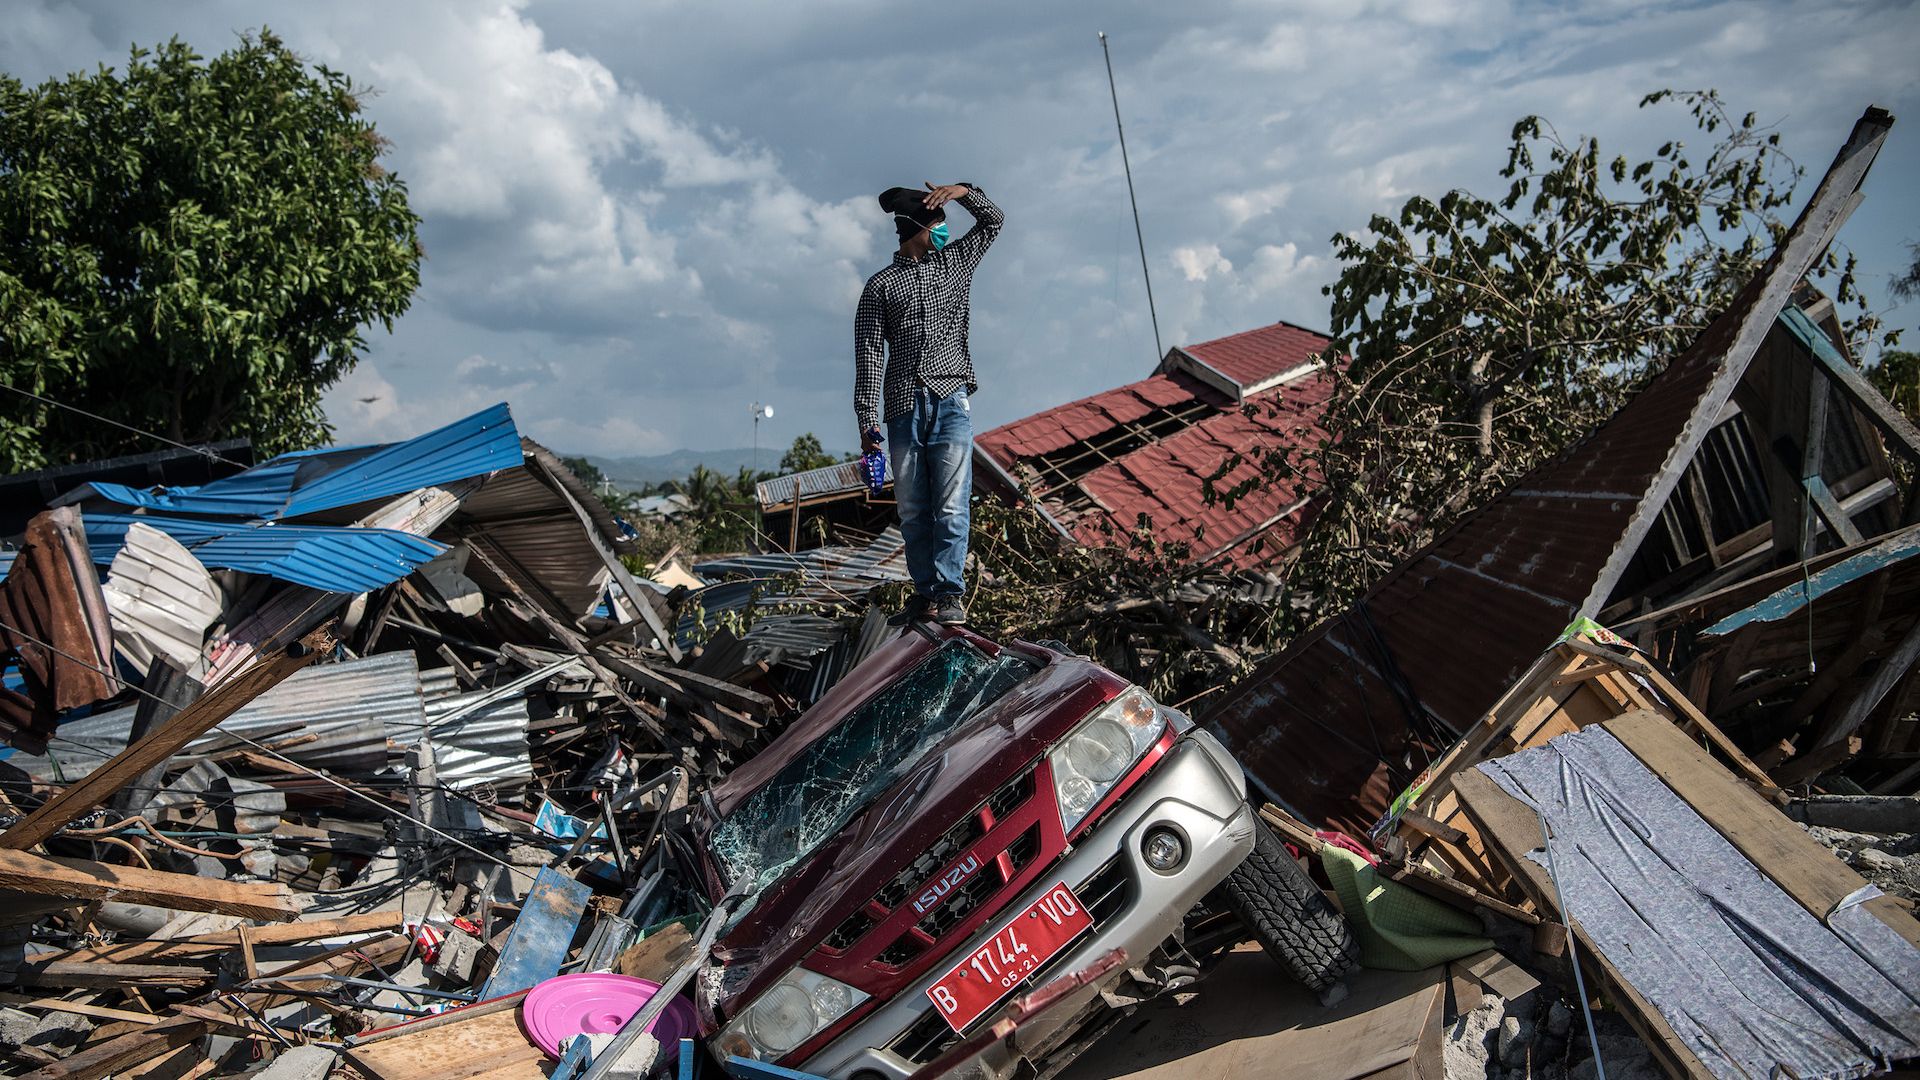 A man stands on a destroyed car as he views the rubble and debris of destroyed buildings following an earthquake in Palu, Indonesia. 